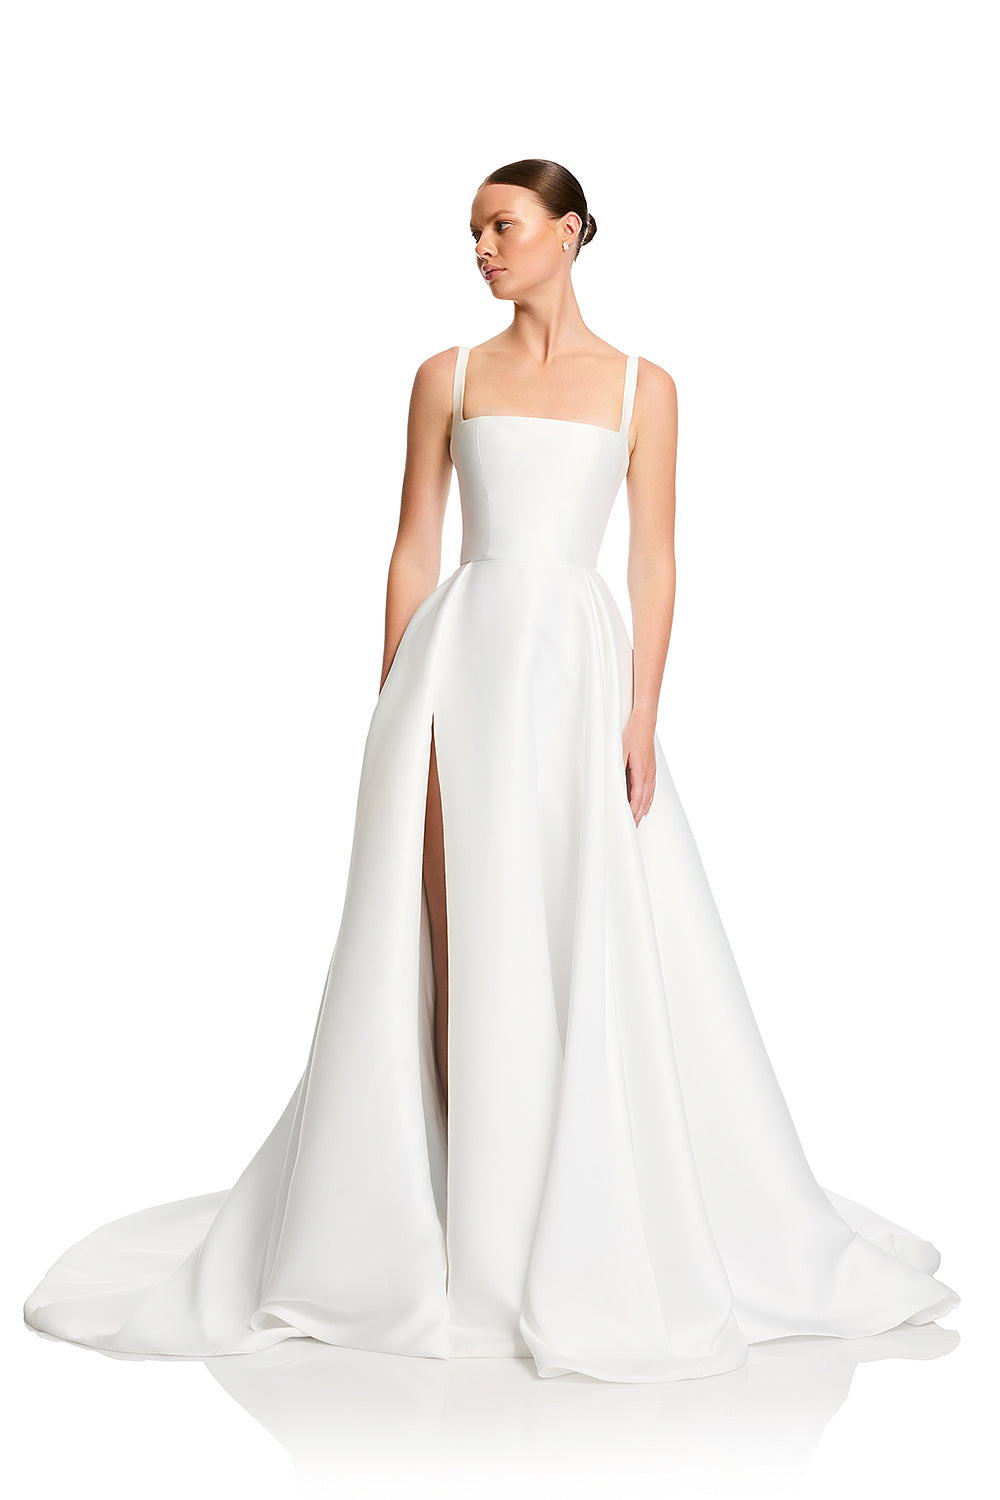 Our essential guide to wedding dress shapes -